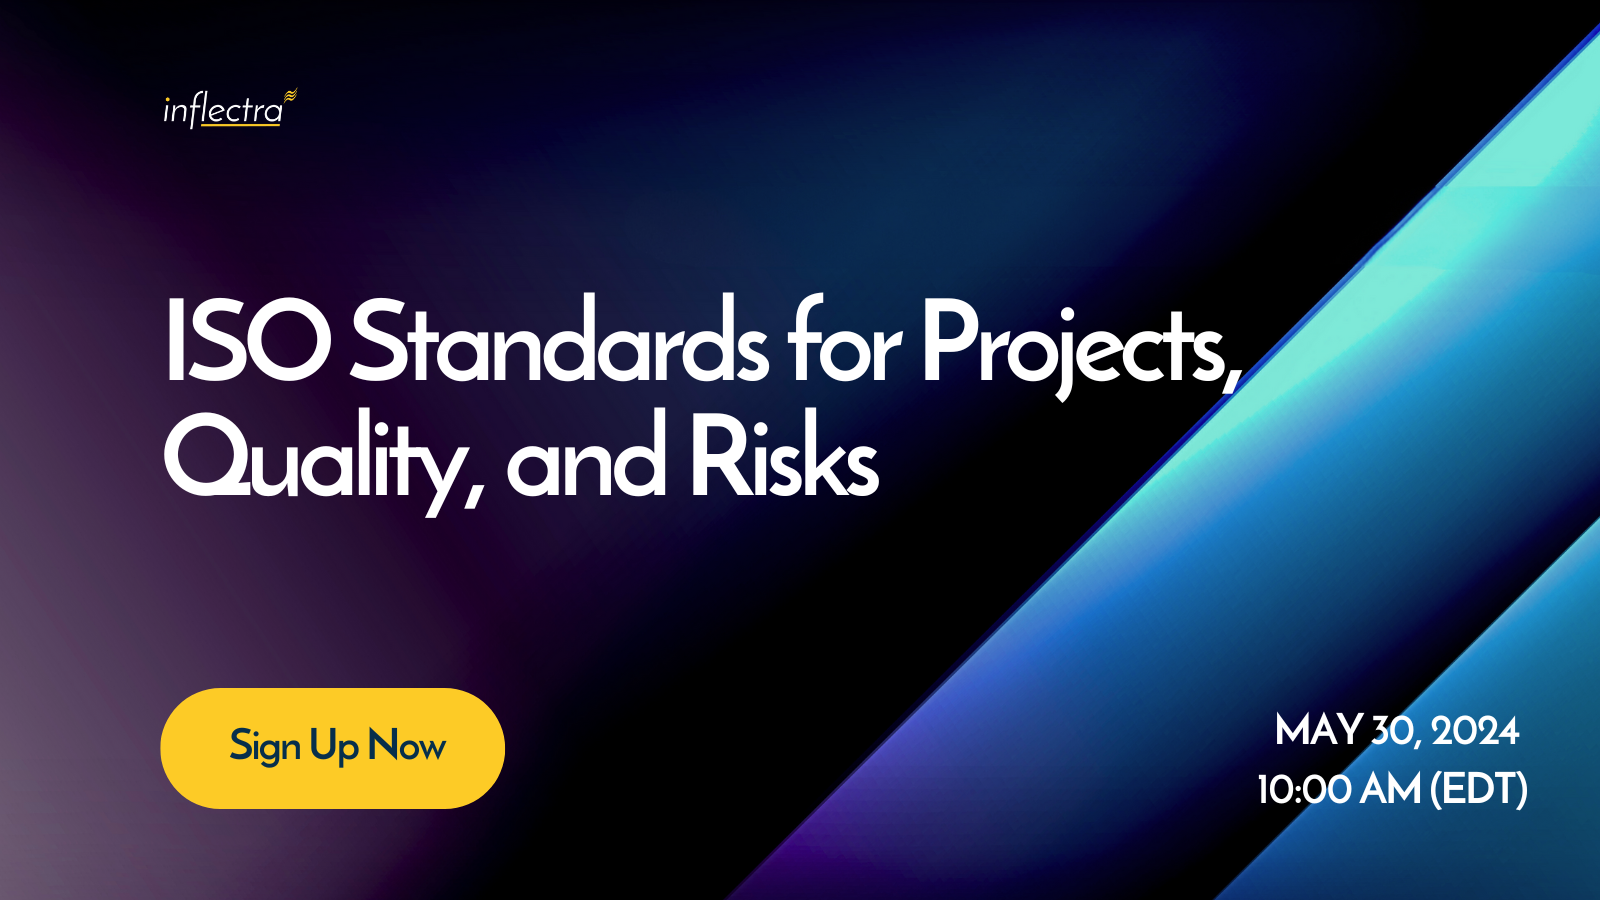 A banner advertising a webinar on ISO standards for projects, quality, and risks. The webinar is being held on May 30, 2024 at 10:00 AM EDT.